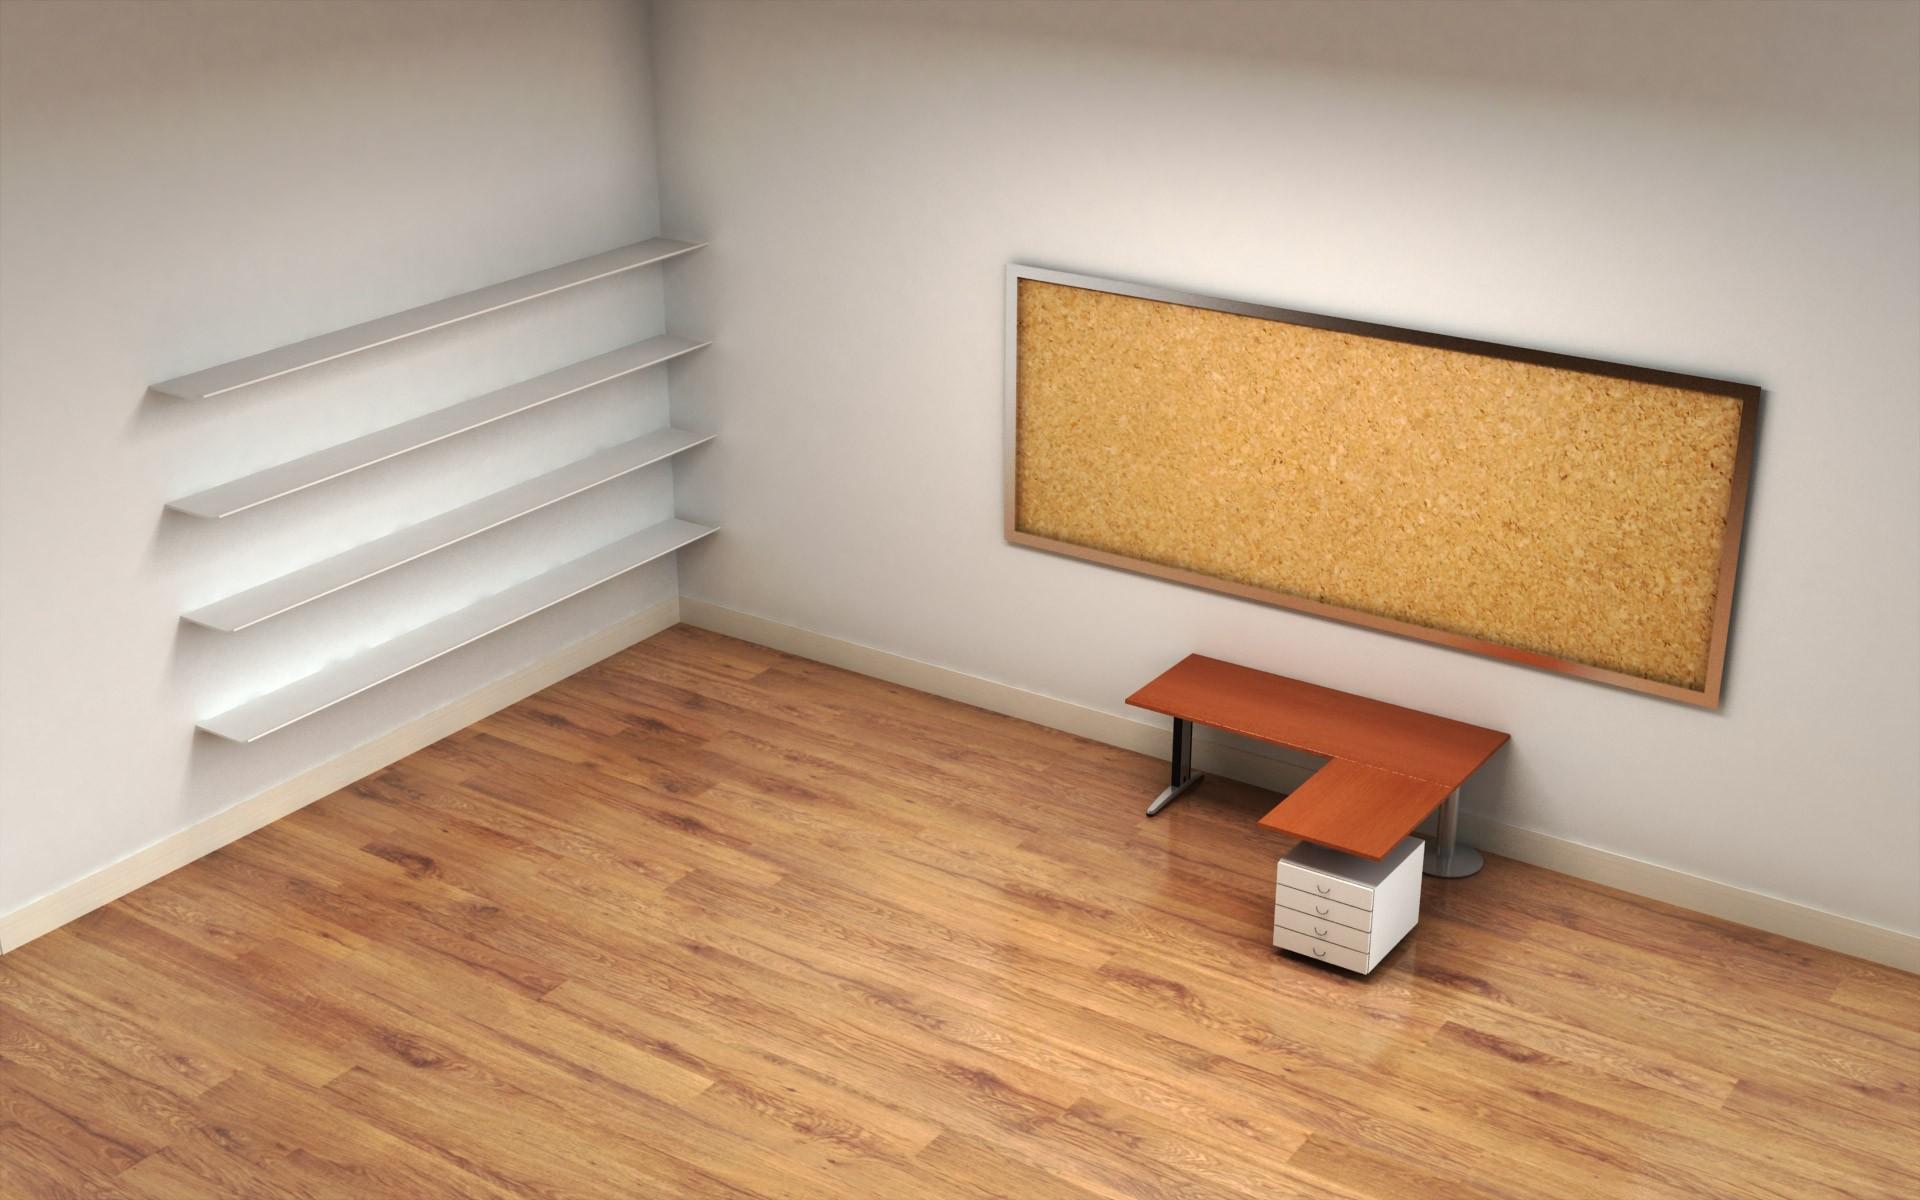 10 Choices desktop background that looks like an office You Can Save It ...